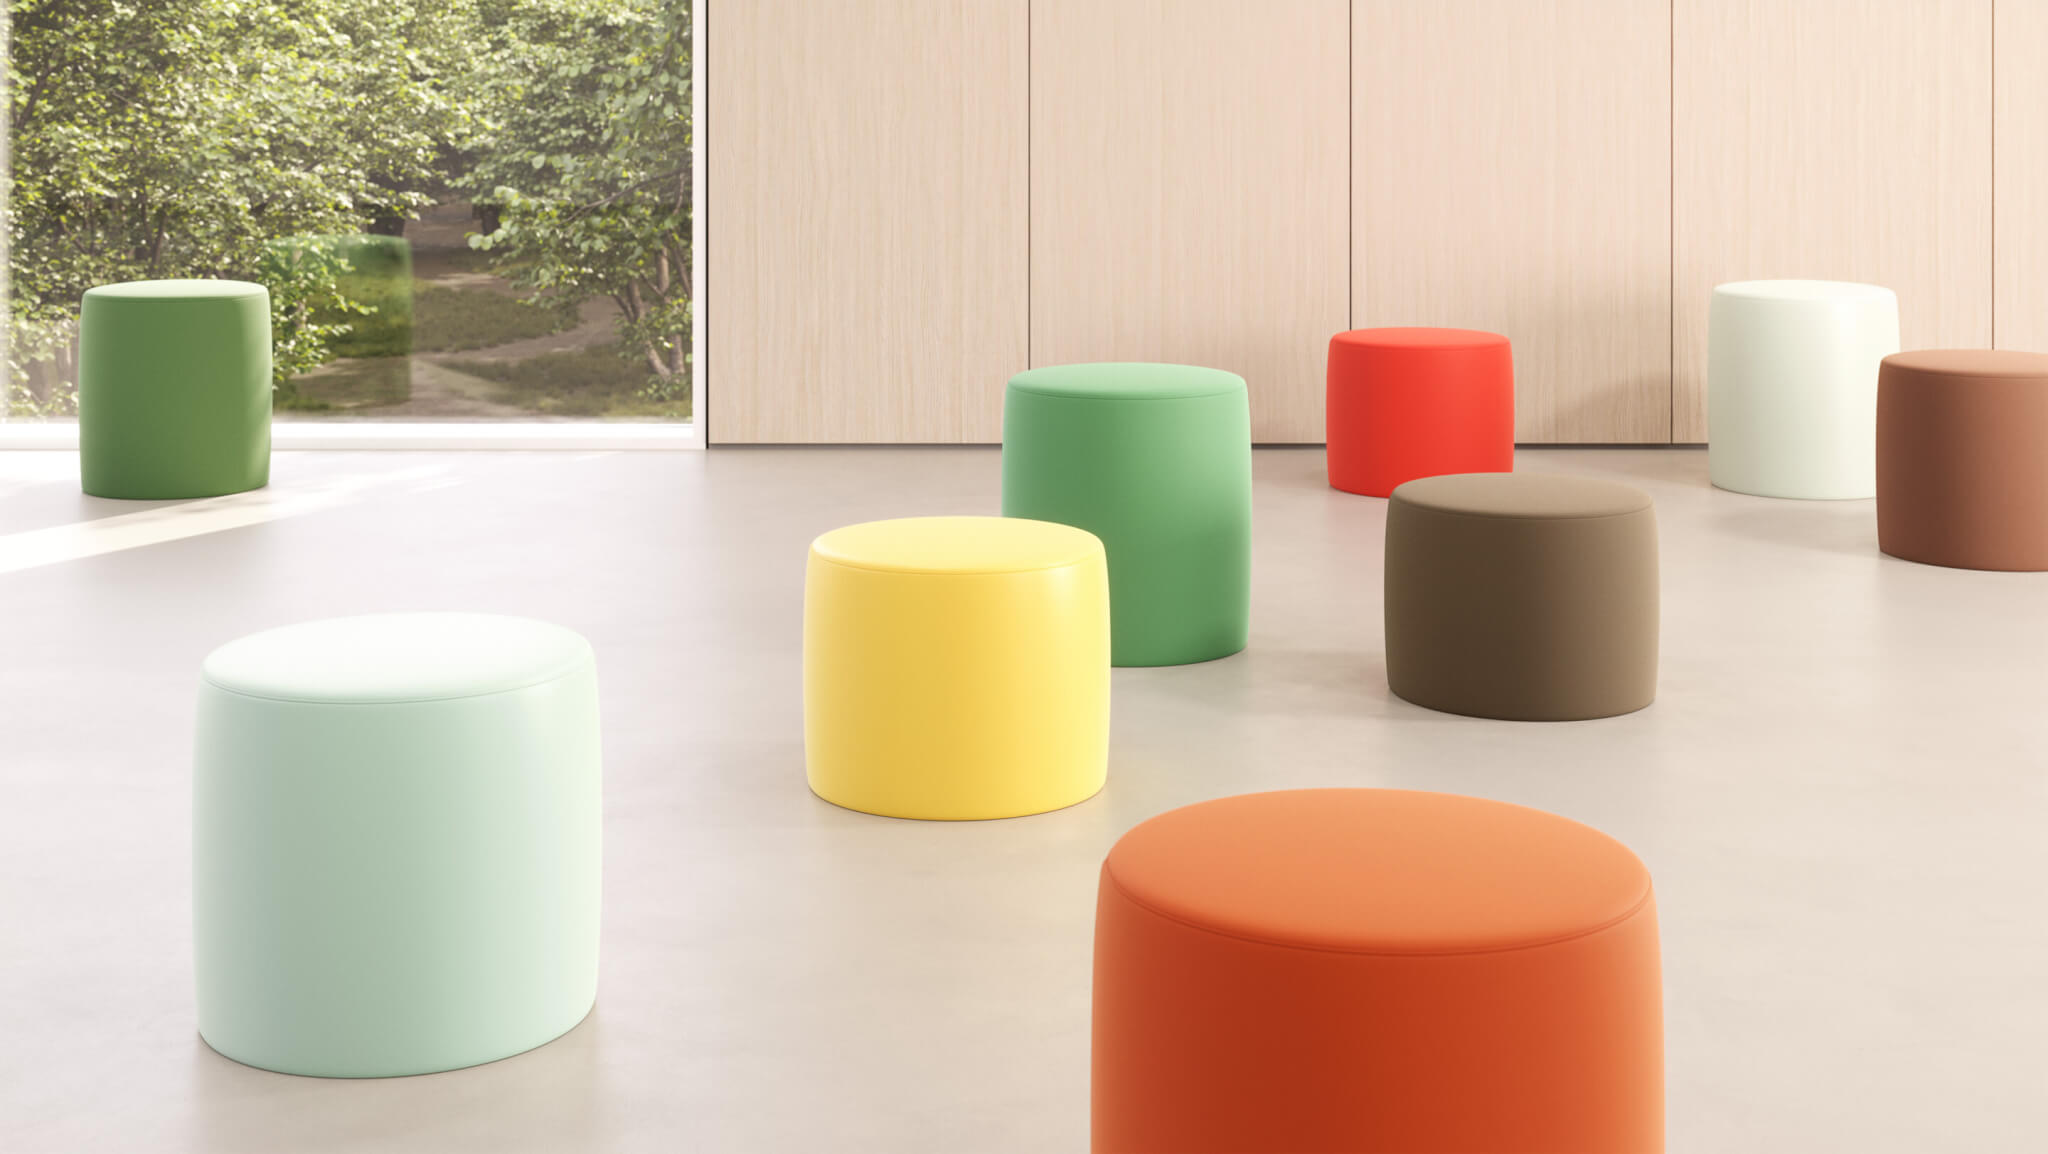 Colorful seats populate the floor of this clean space